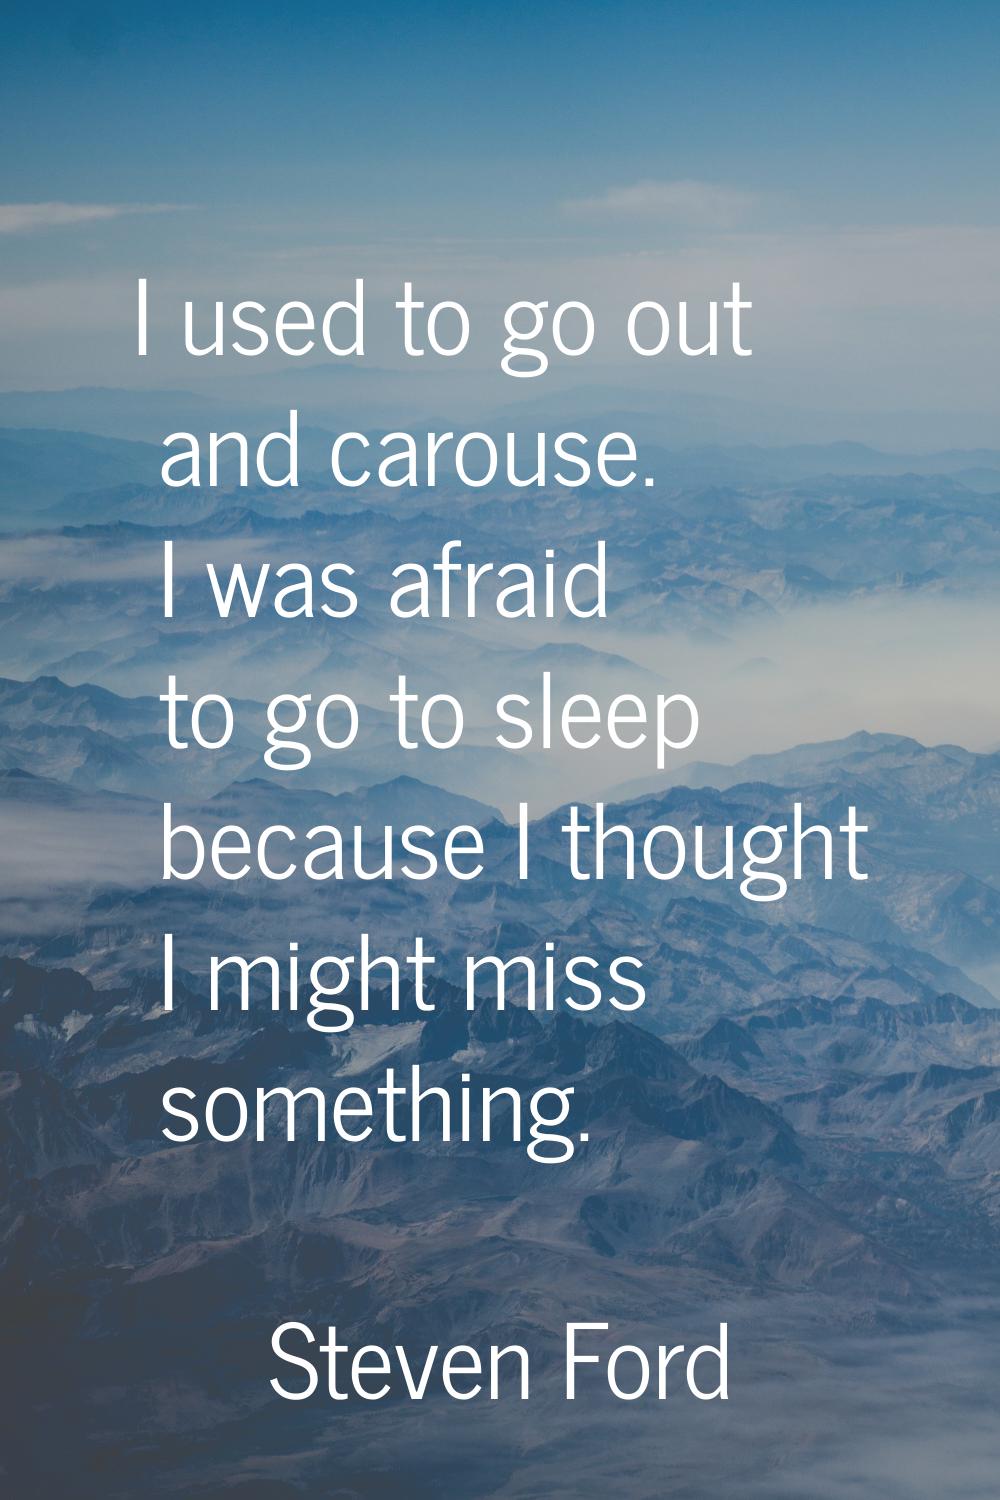 I used to go out and carouse. I was afraid to go to sleep because I thought I might miss something.